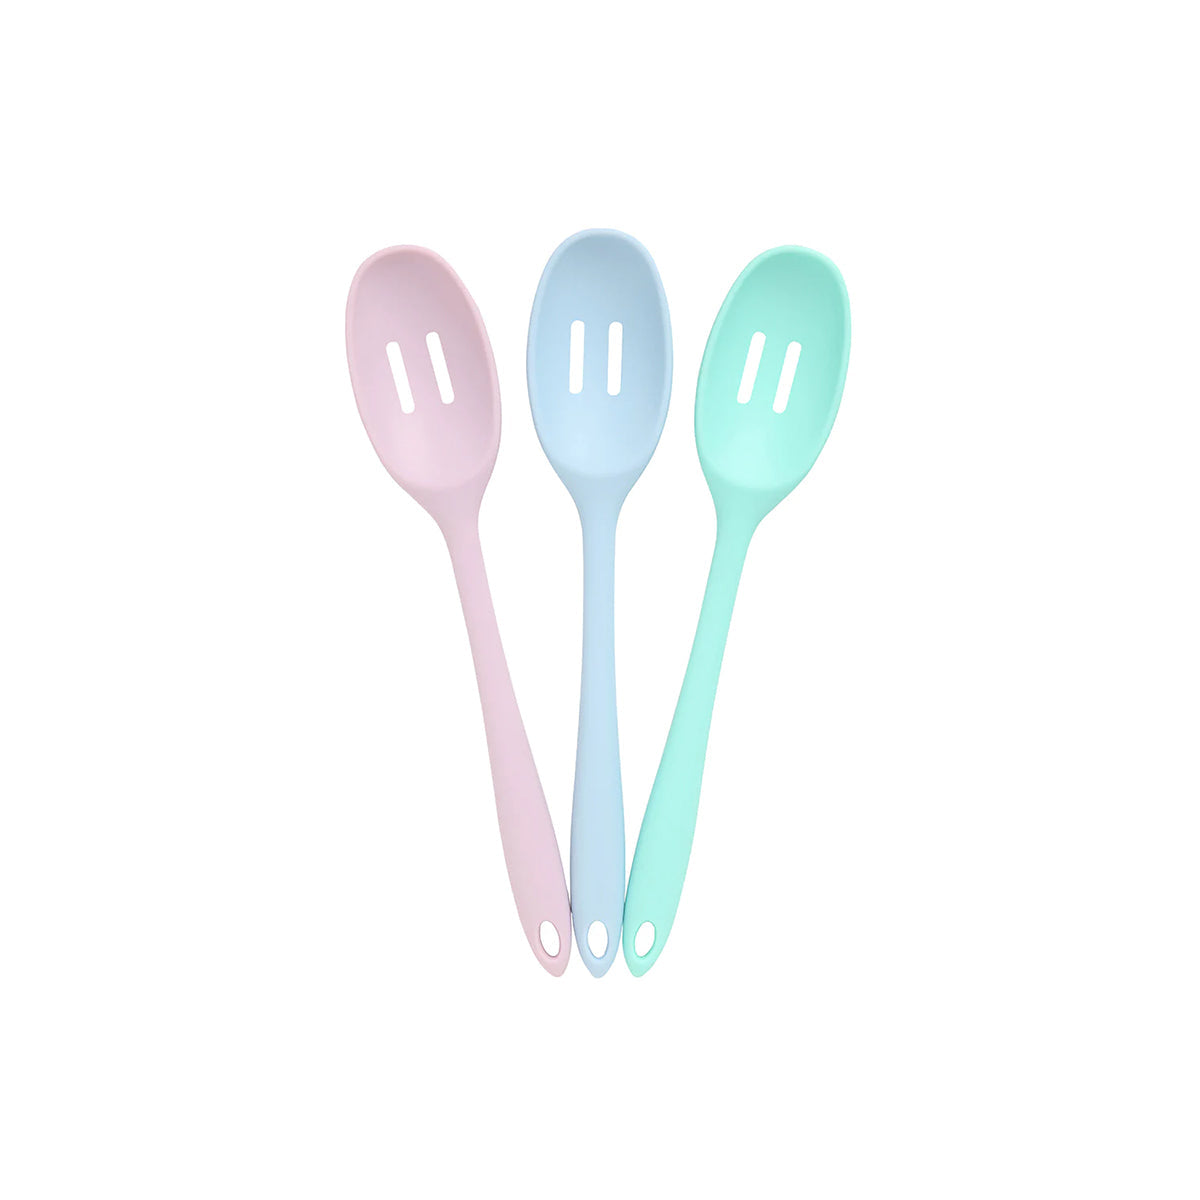 WLT43543-B Wiltshire Silicone Slotted Spoon Colour Rush Tomkin Australia Hospitality Supplies